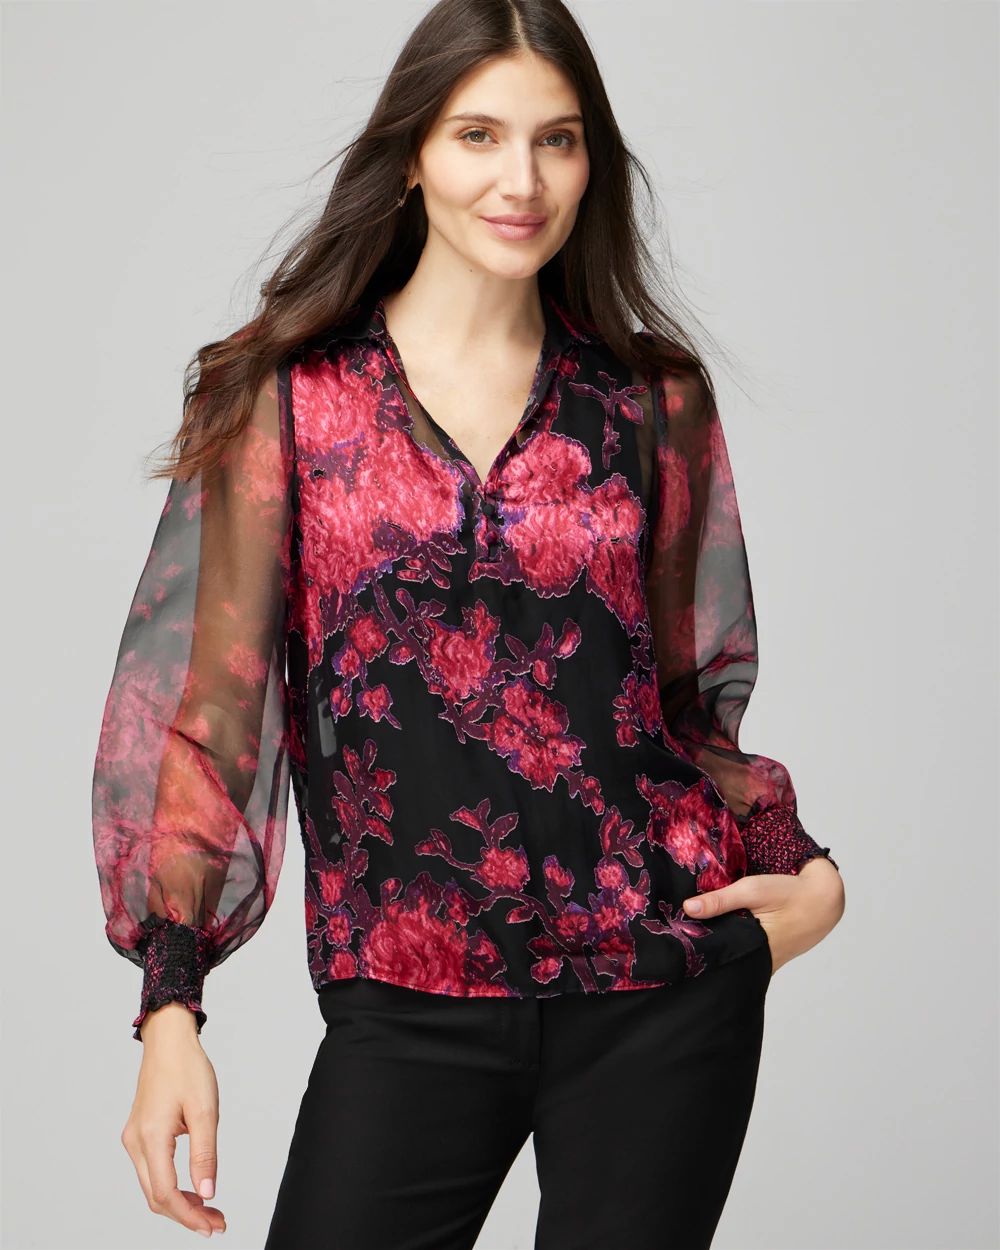 Organza Sleeve Silk Burnout Blouse click to view larger image.